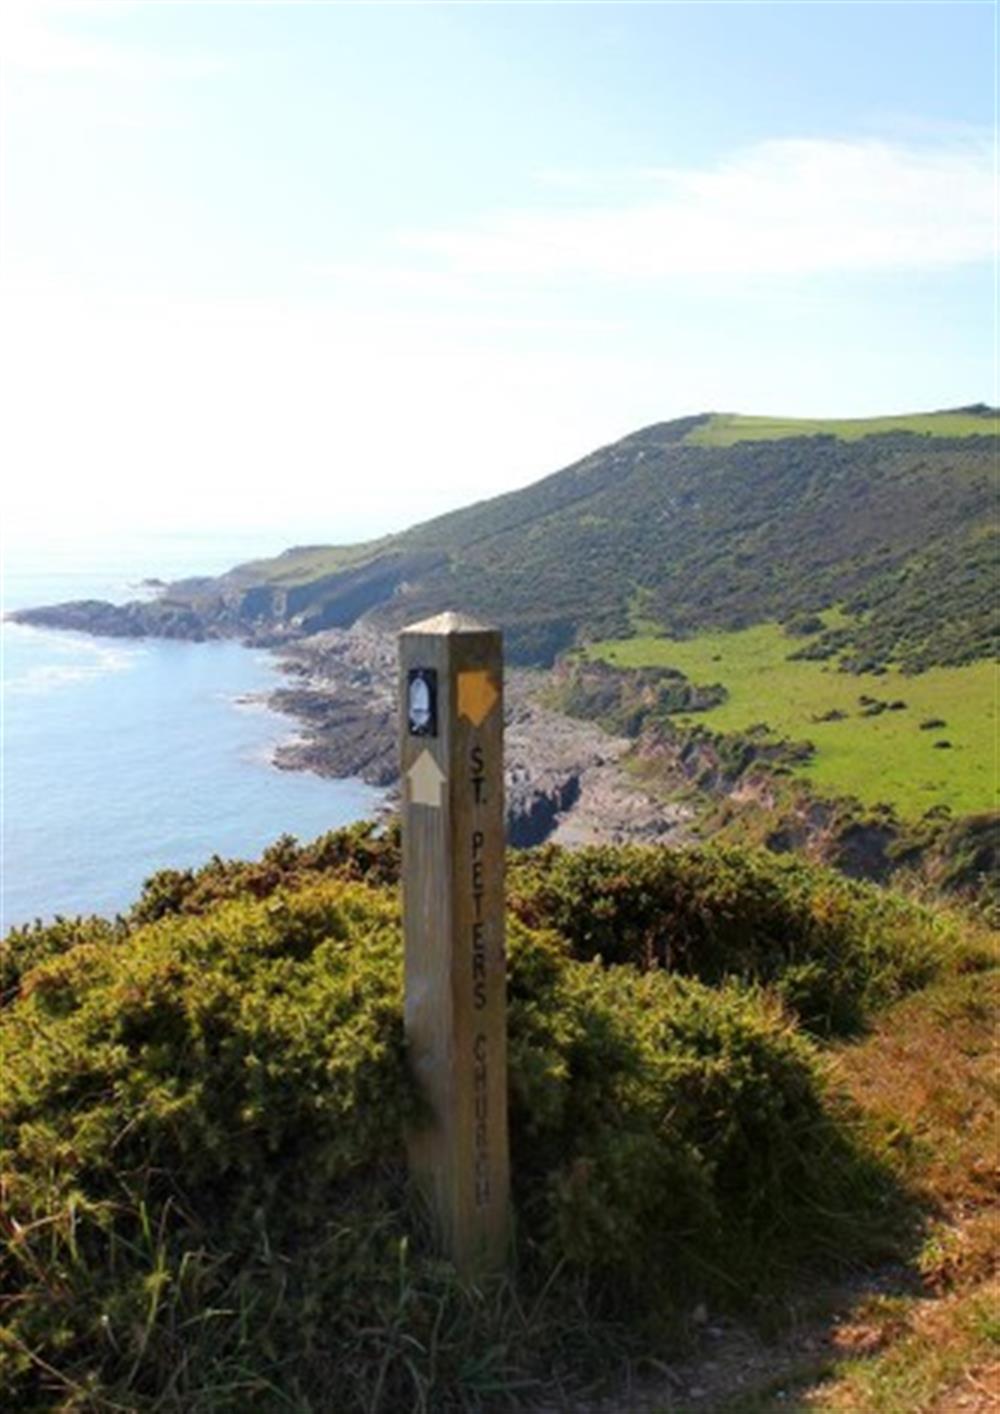 South West Coastal Path runs immediately by the properties at Revelstoke Combined in Noss Mayo